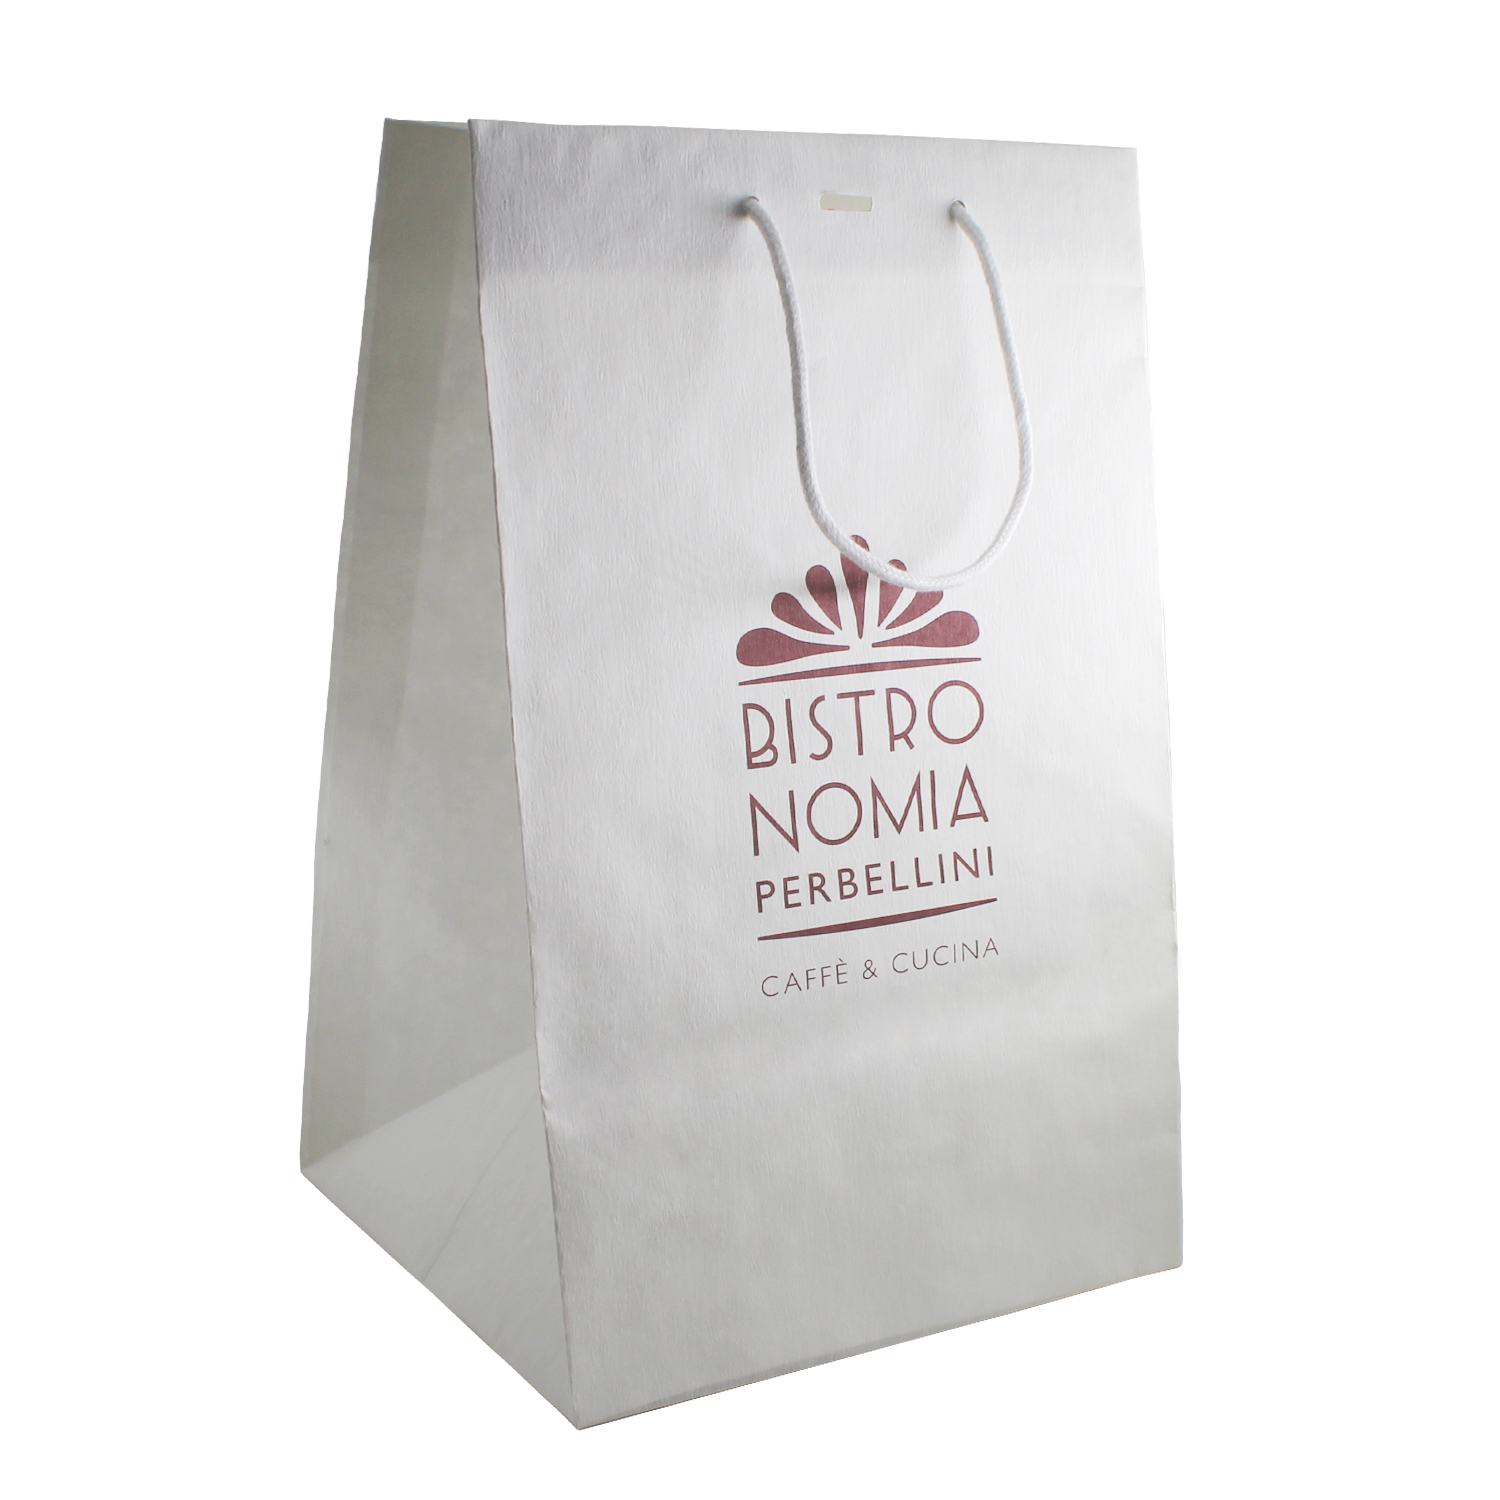 Large white Biscuits shopper